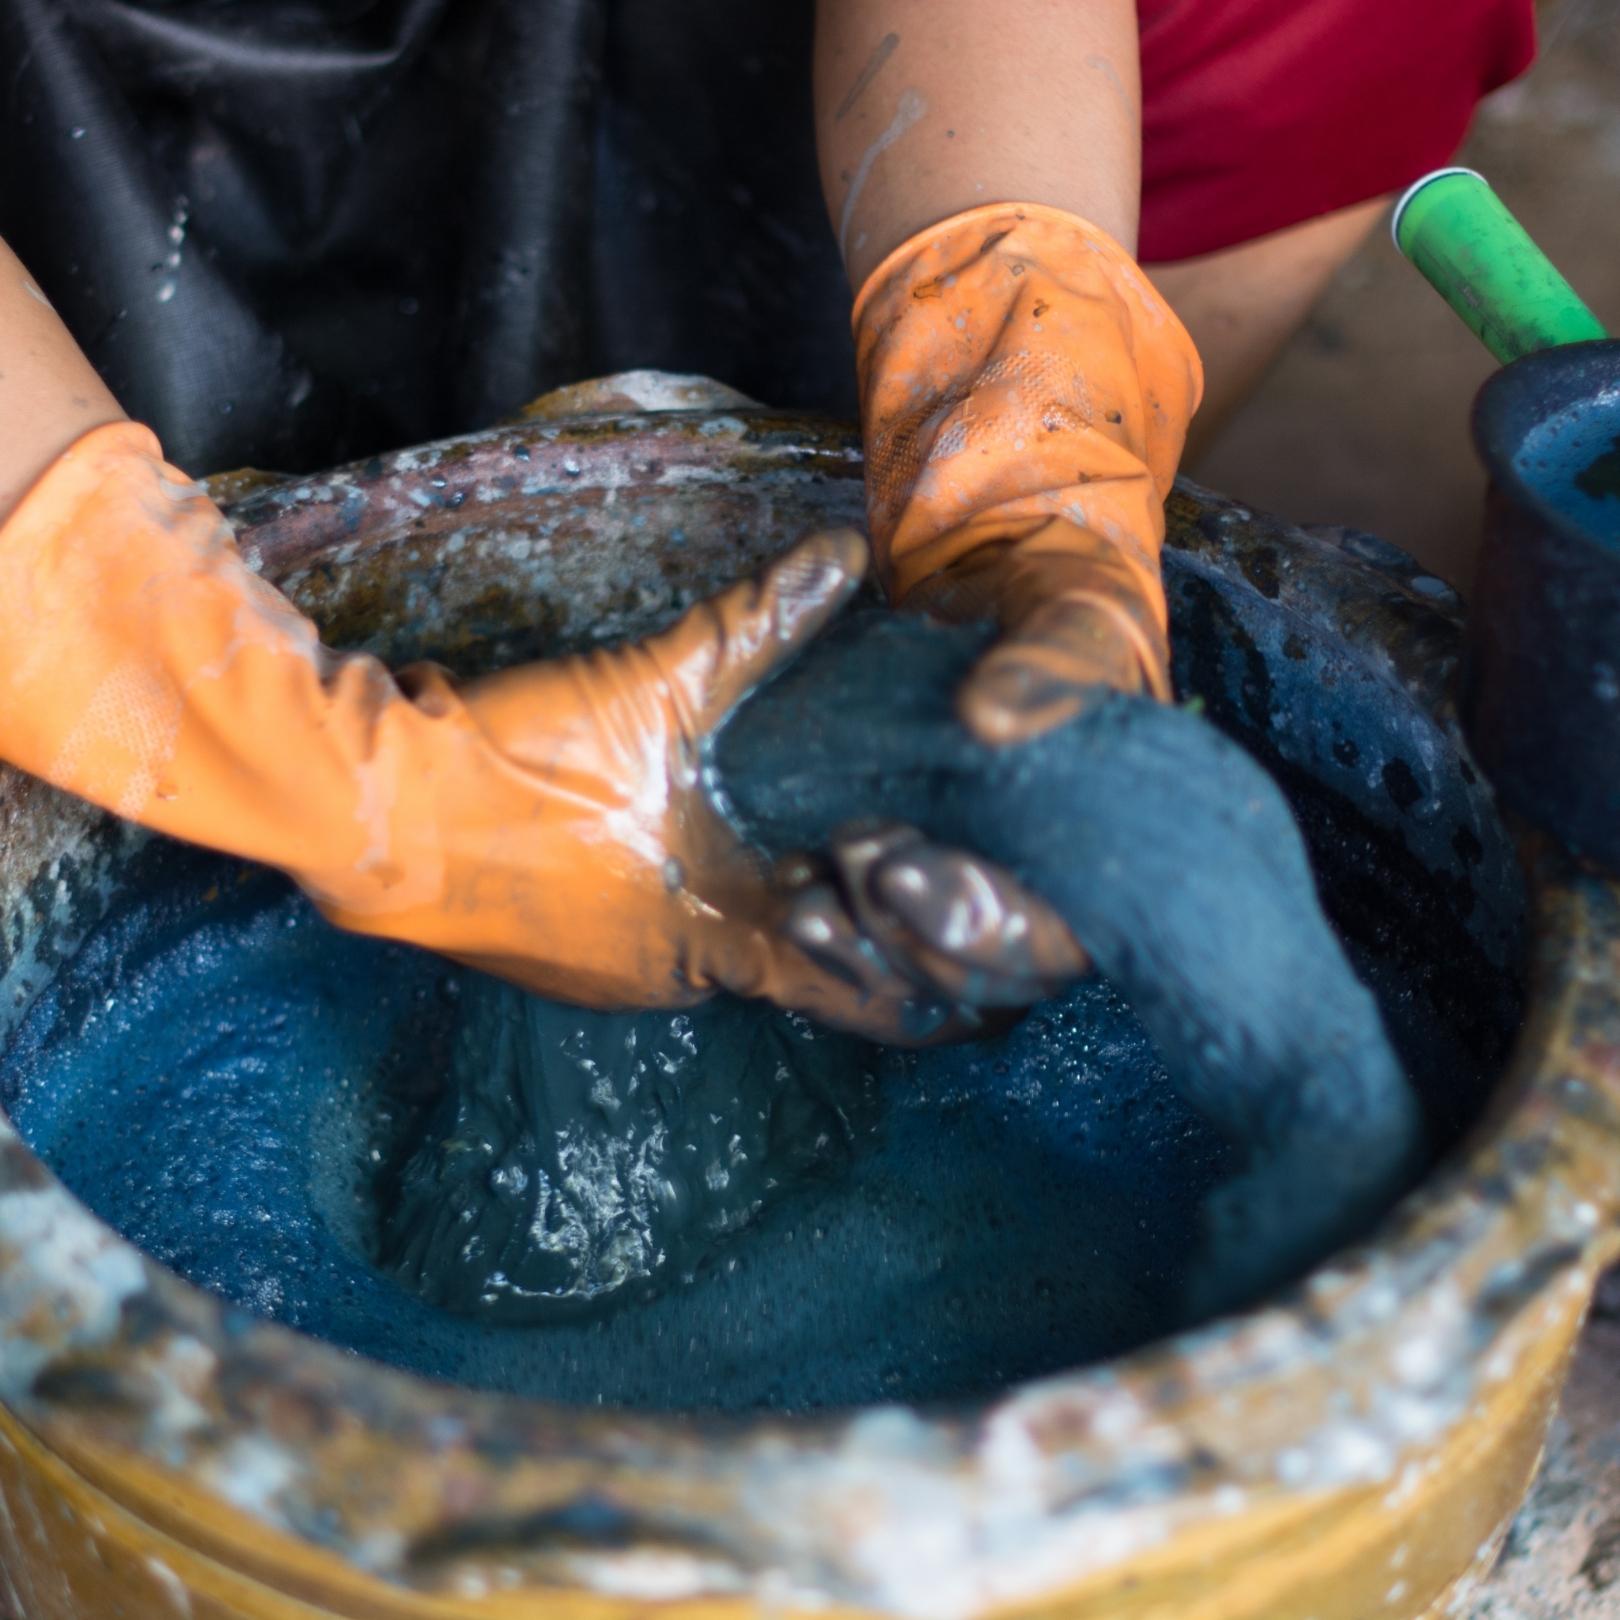 image of hands wearing orange gloves ringing a cloth in a tub filled with indigo dye.